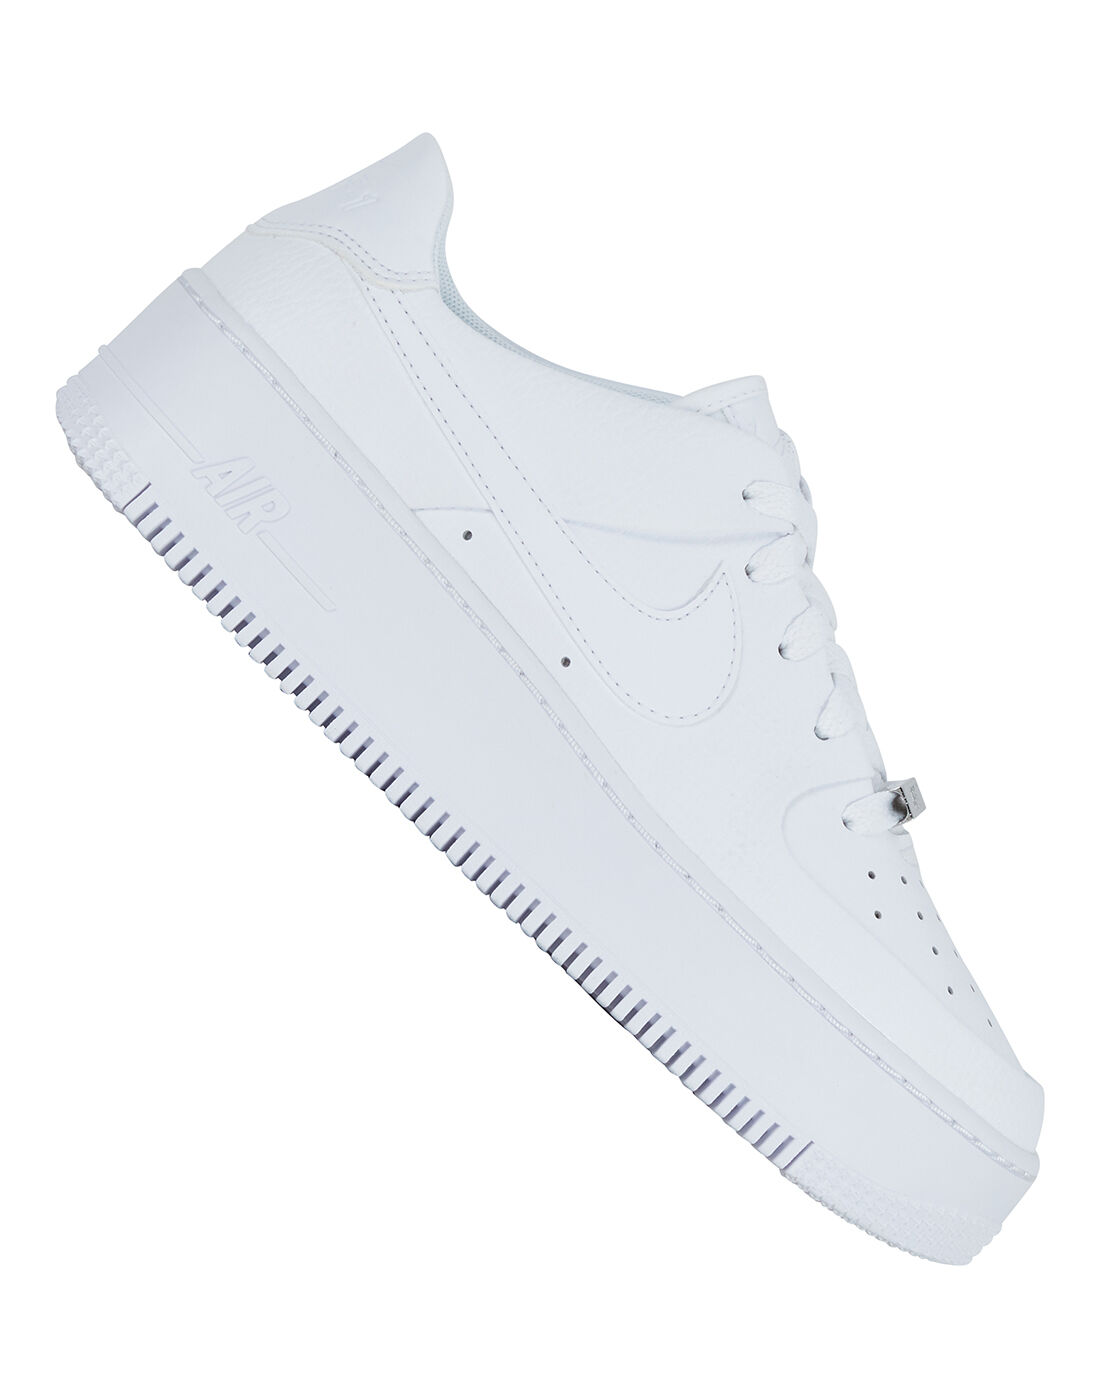 nike air force 1 sage low all white